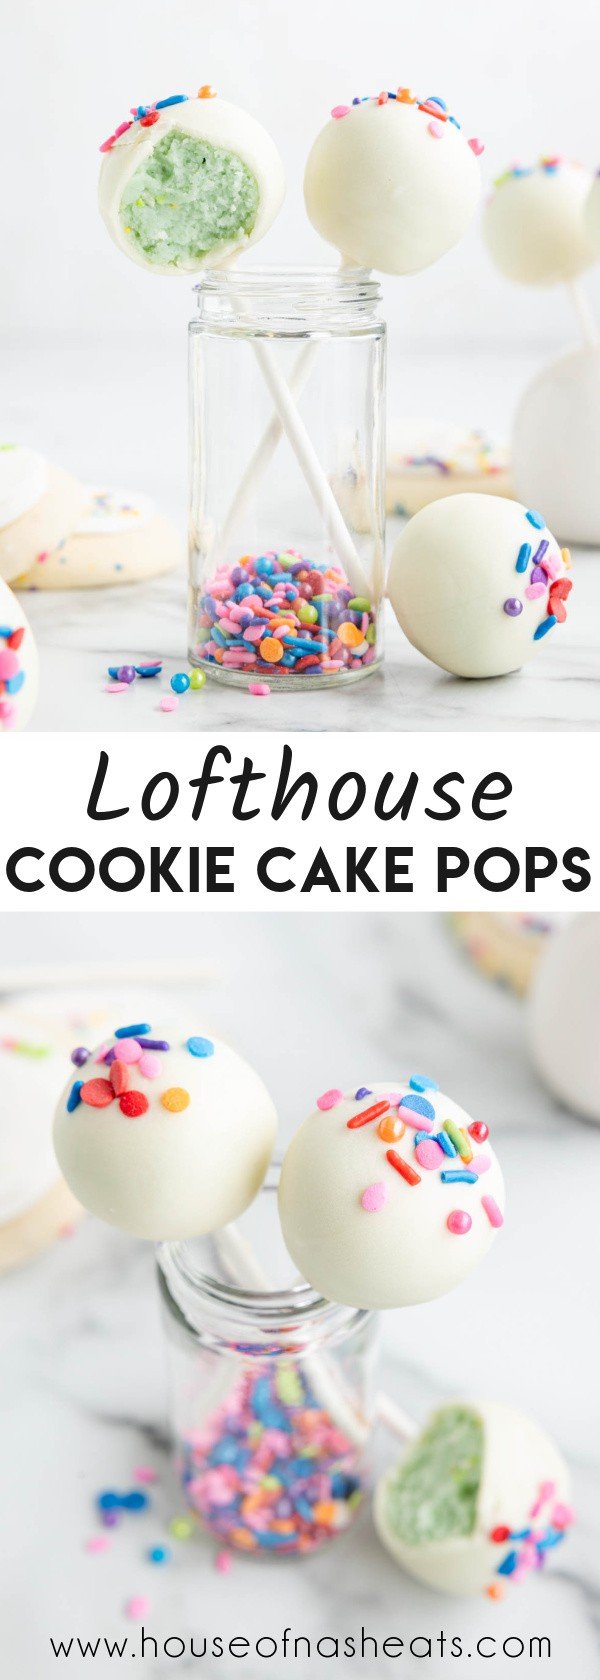 A collage of images of lofthouse cookie cake pops with text overlay.